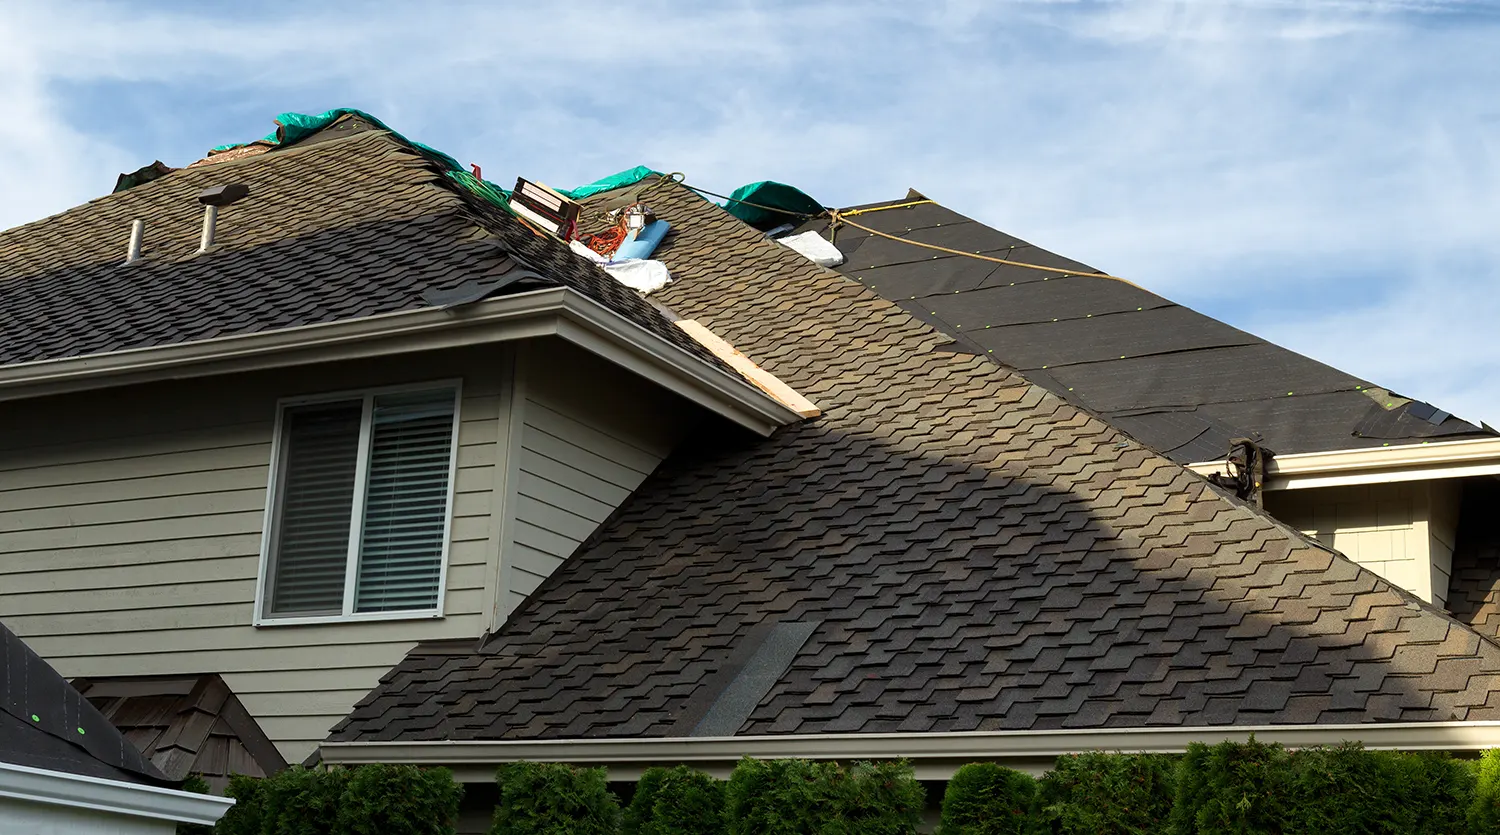 Discover expert tips on Roof Soffit Repair in our comprehensive guide. Learn how to protect your home effectively and efficiently.